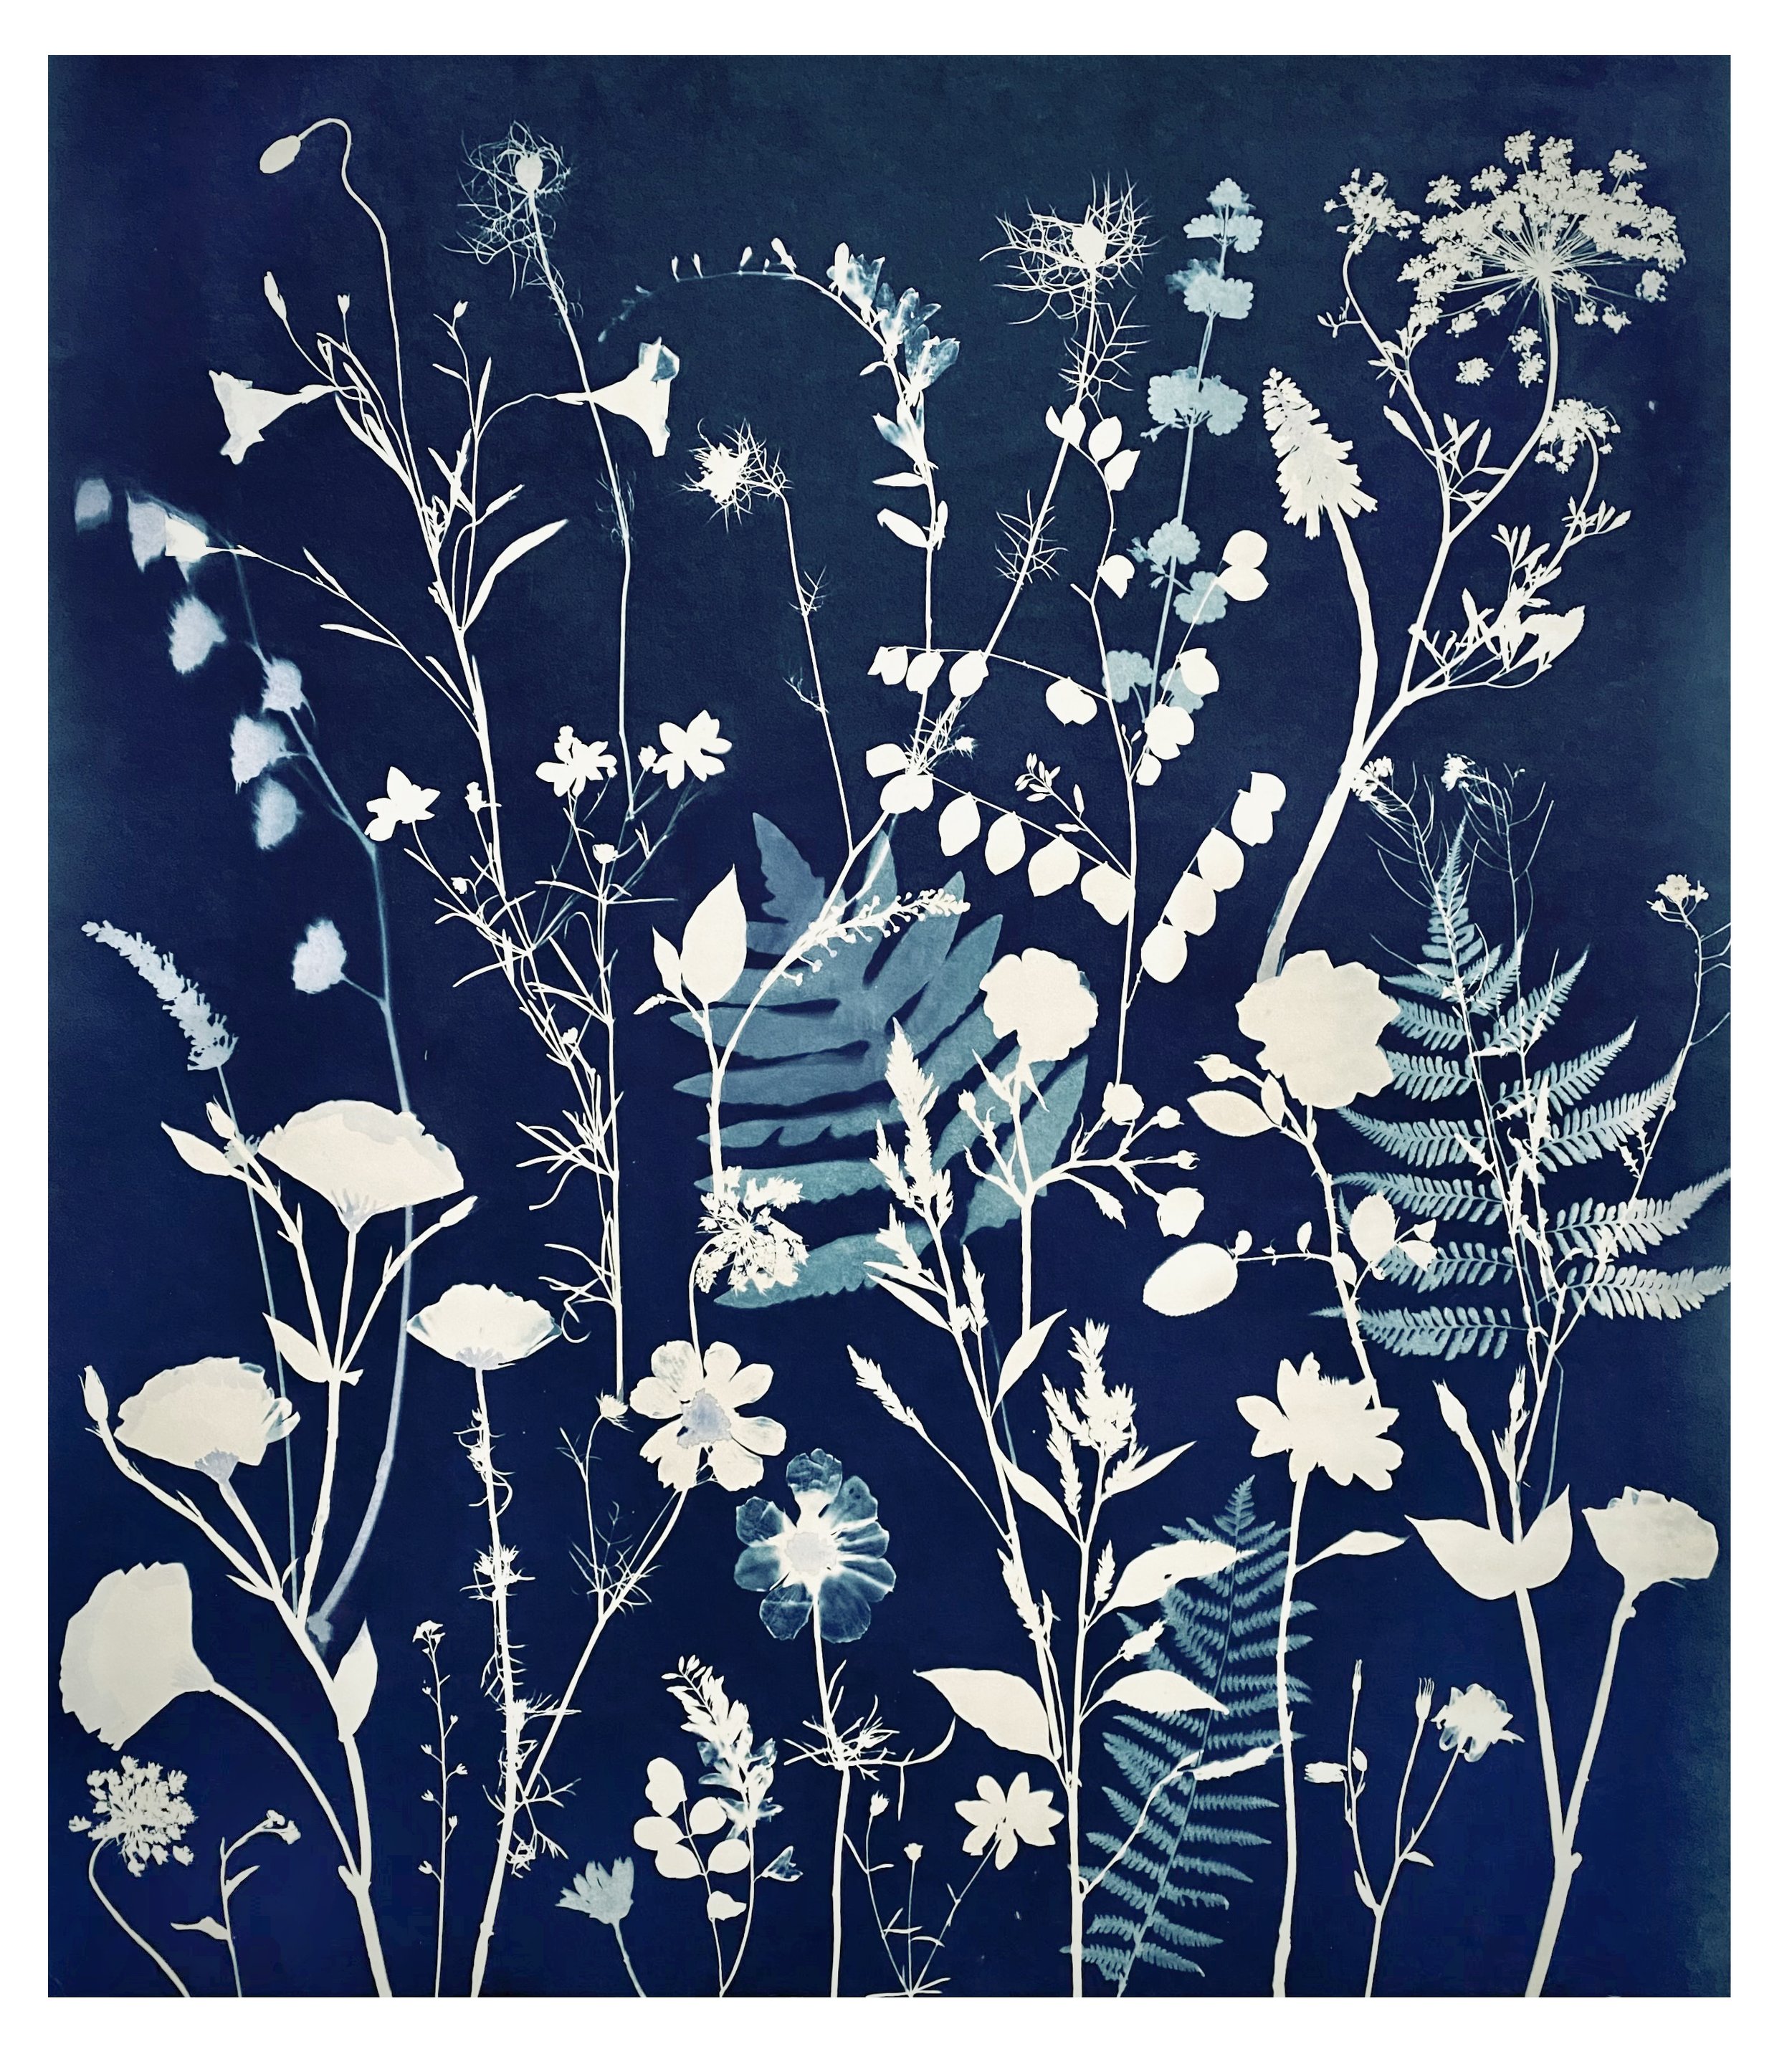 Cyanotype Painting (Queen Anne's Lace, Ferns, Leaves, etc)